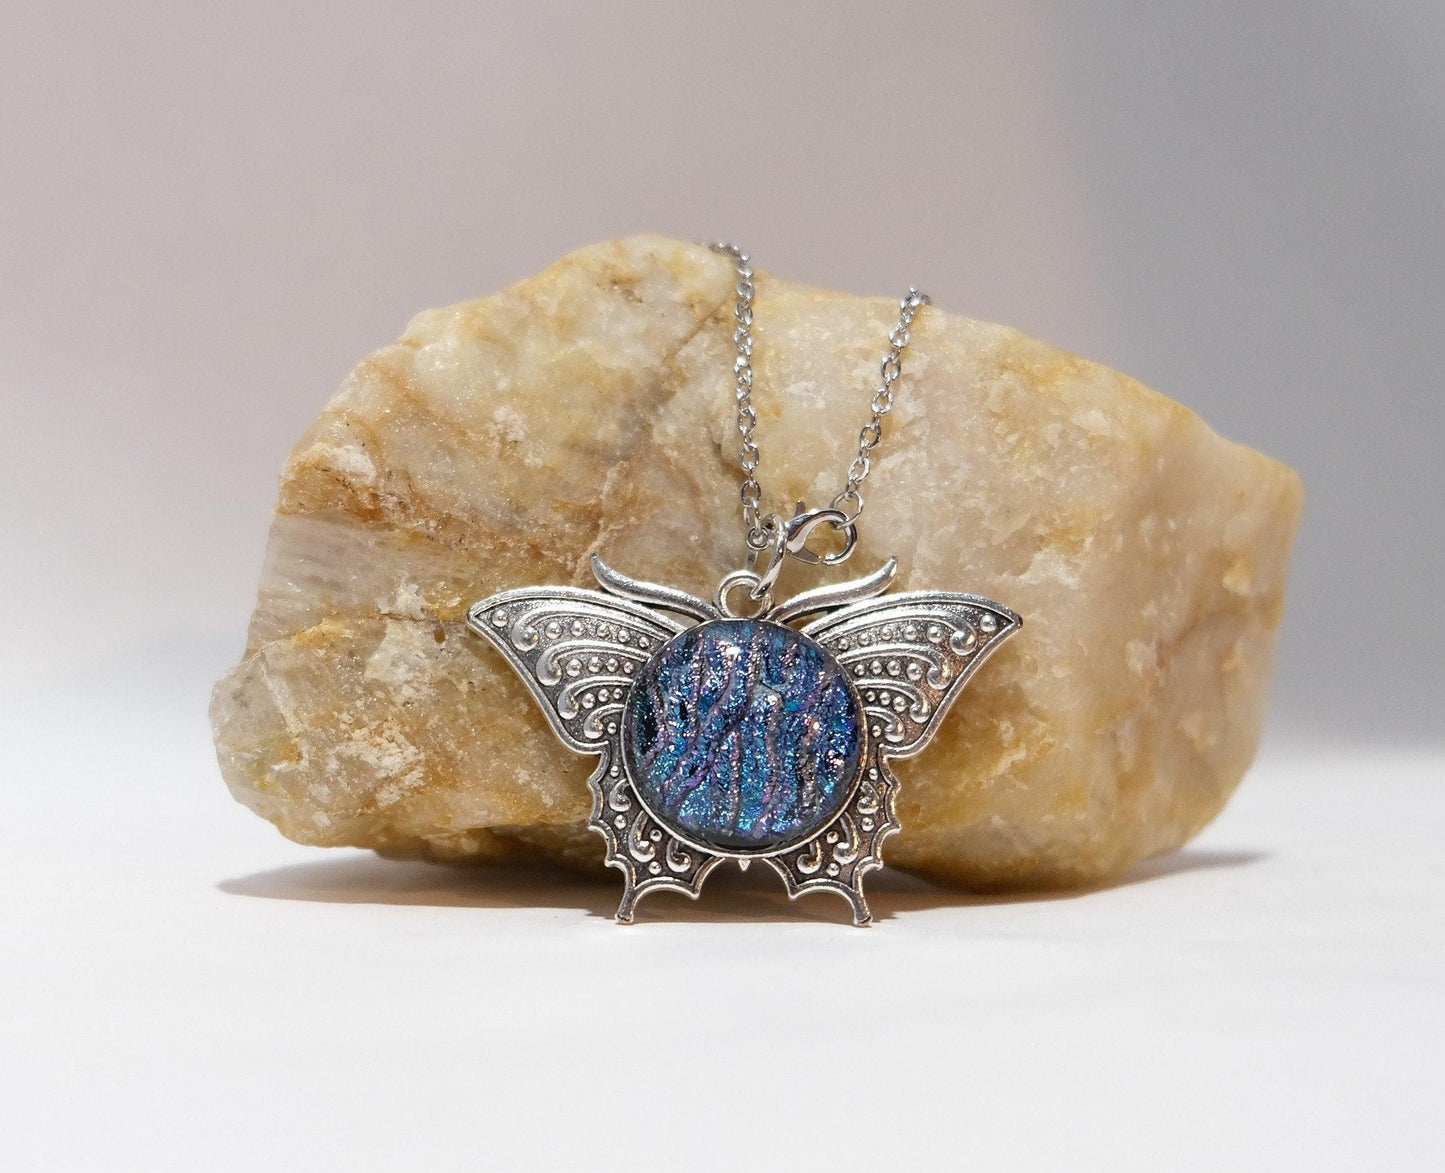 Butterfly pendant necklace, silver tone with blue/multicolor dichroic fused glass center stone on a 20 inch steel chain